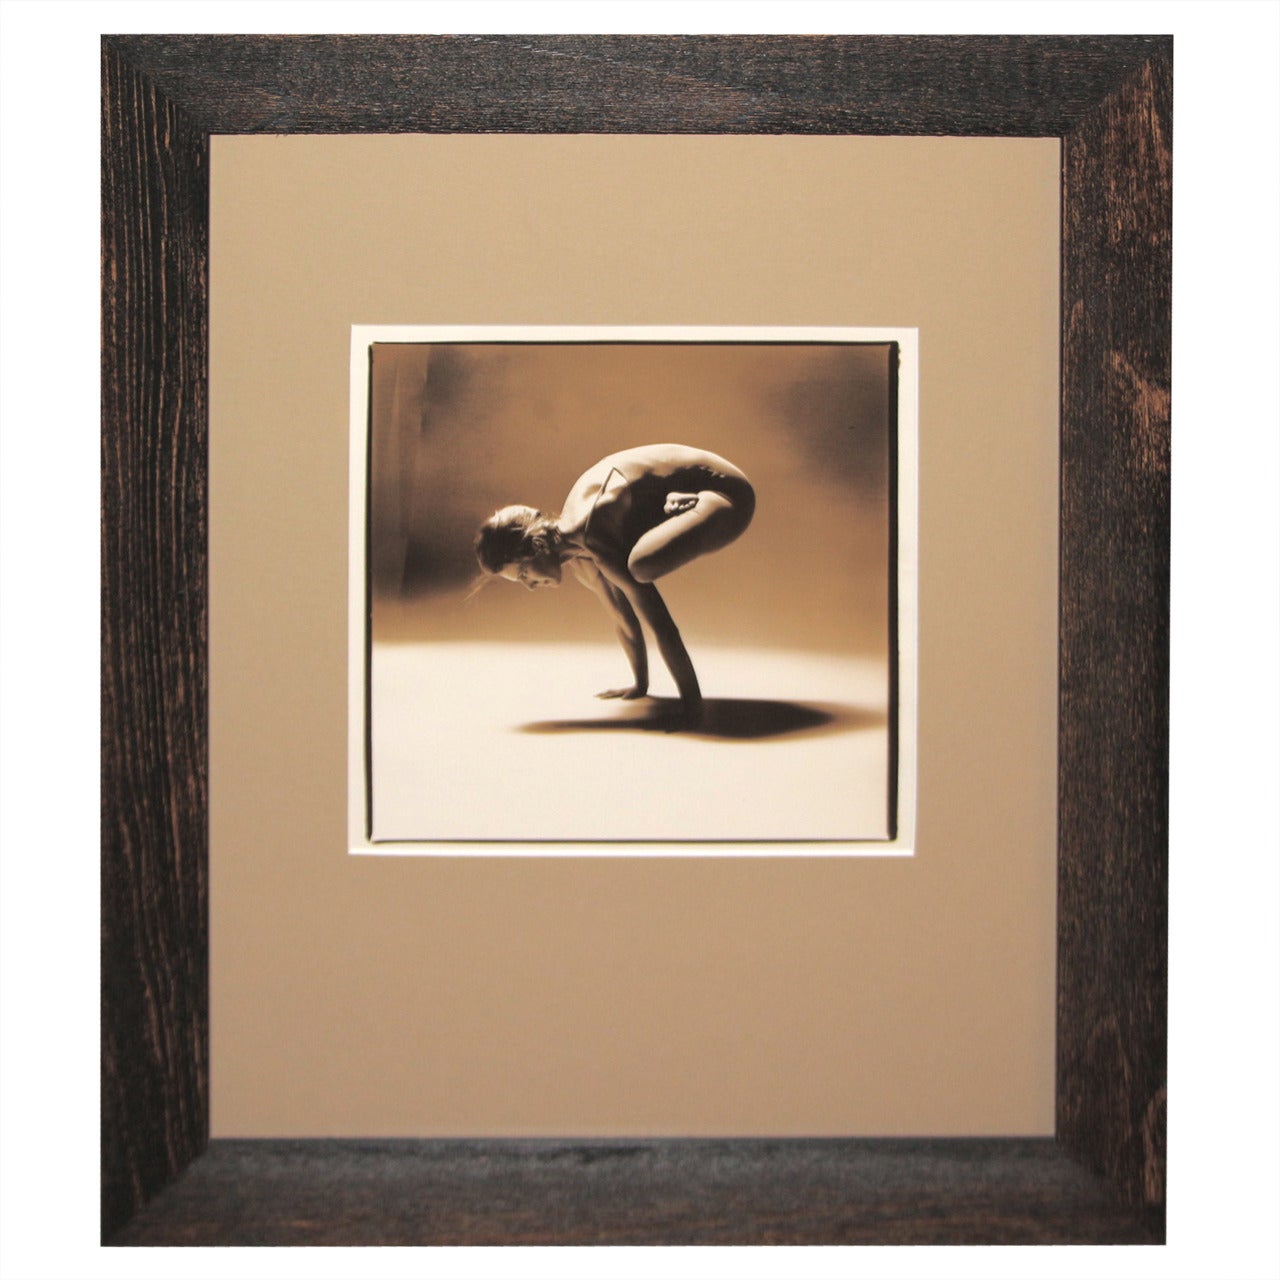 Sepia Toned Photograph of a Woman in a Yoga Position